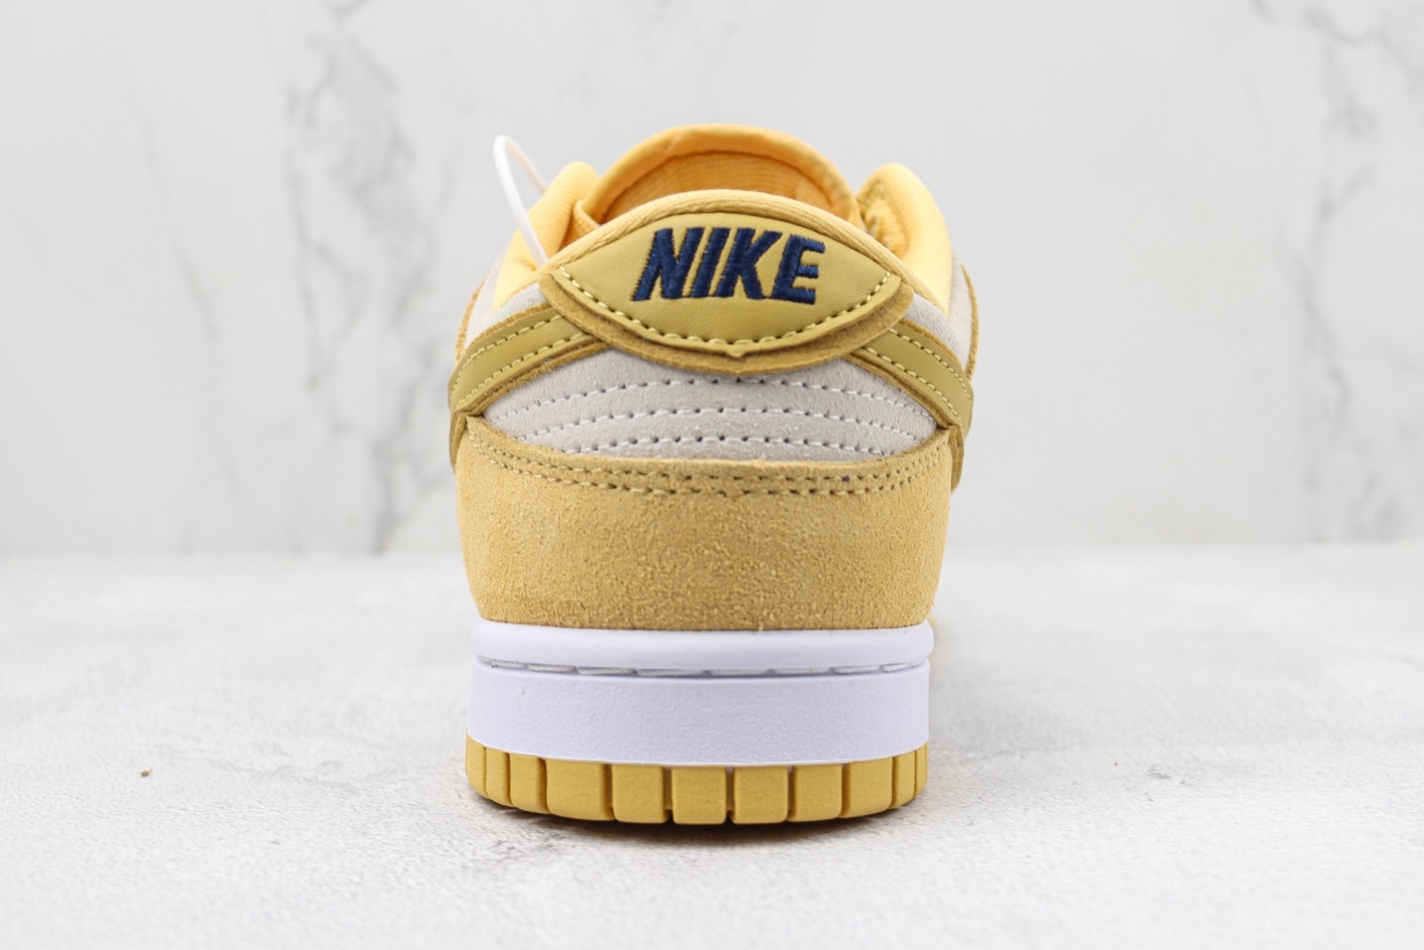 Nike Dunk Low 'Celestial Gold Suede' DV7411-200 - Stylish and Luxurious Sneakers